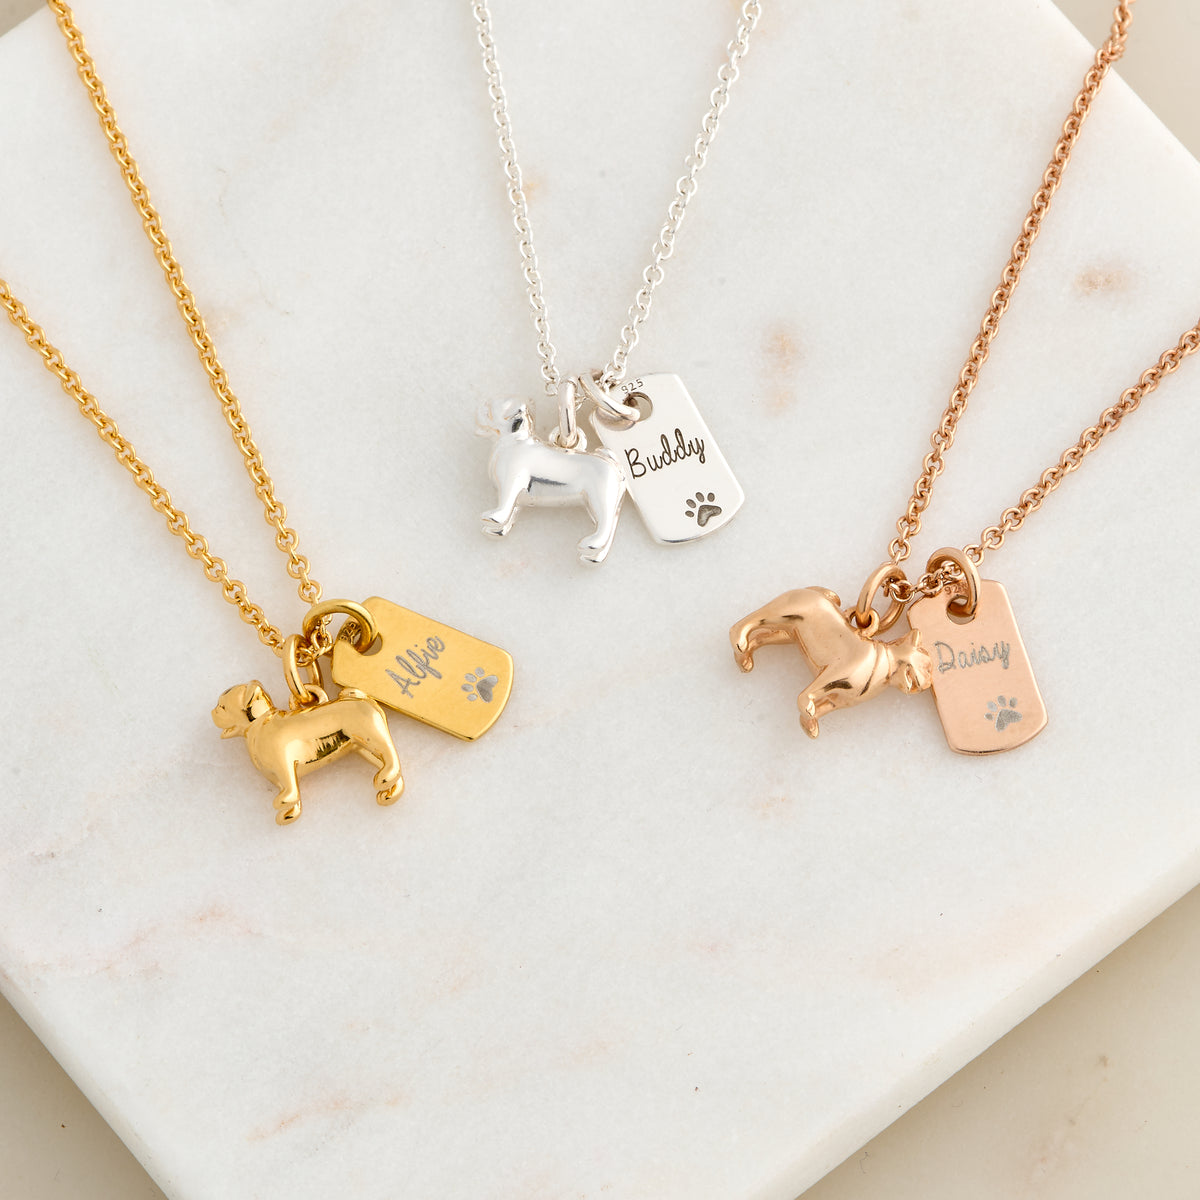 pug dog 18ct yellow gold rose gold plated silver personalised dog necklace by Scarlett jewellery Uk